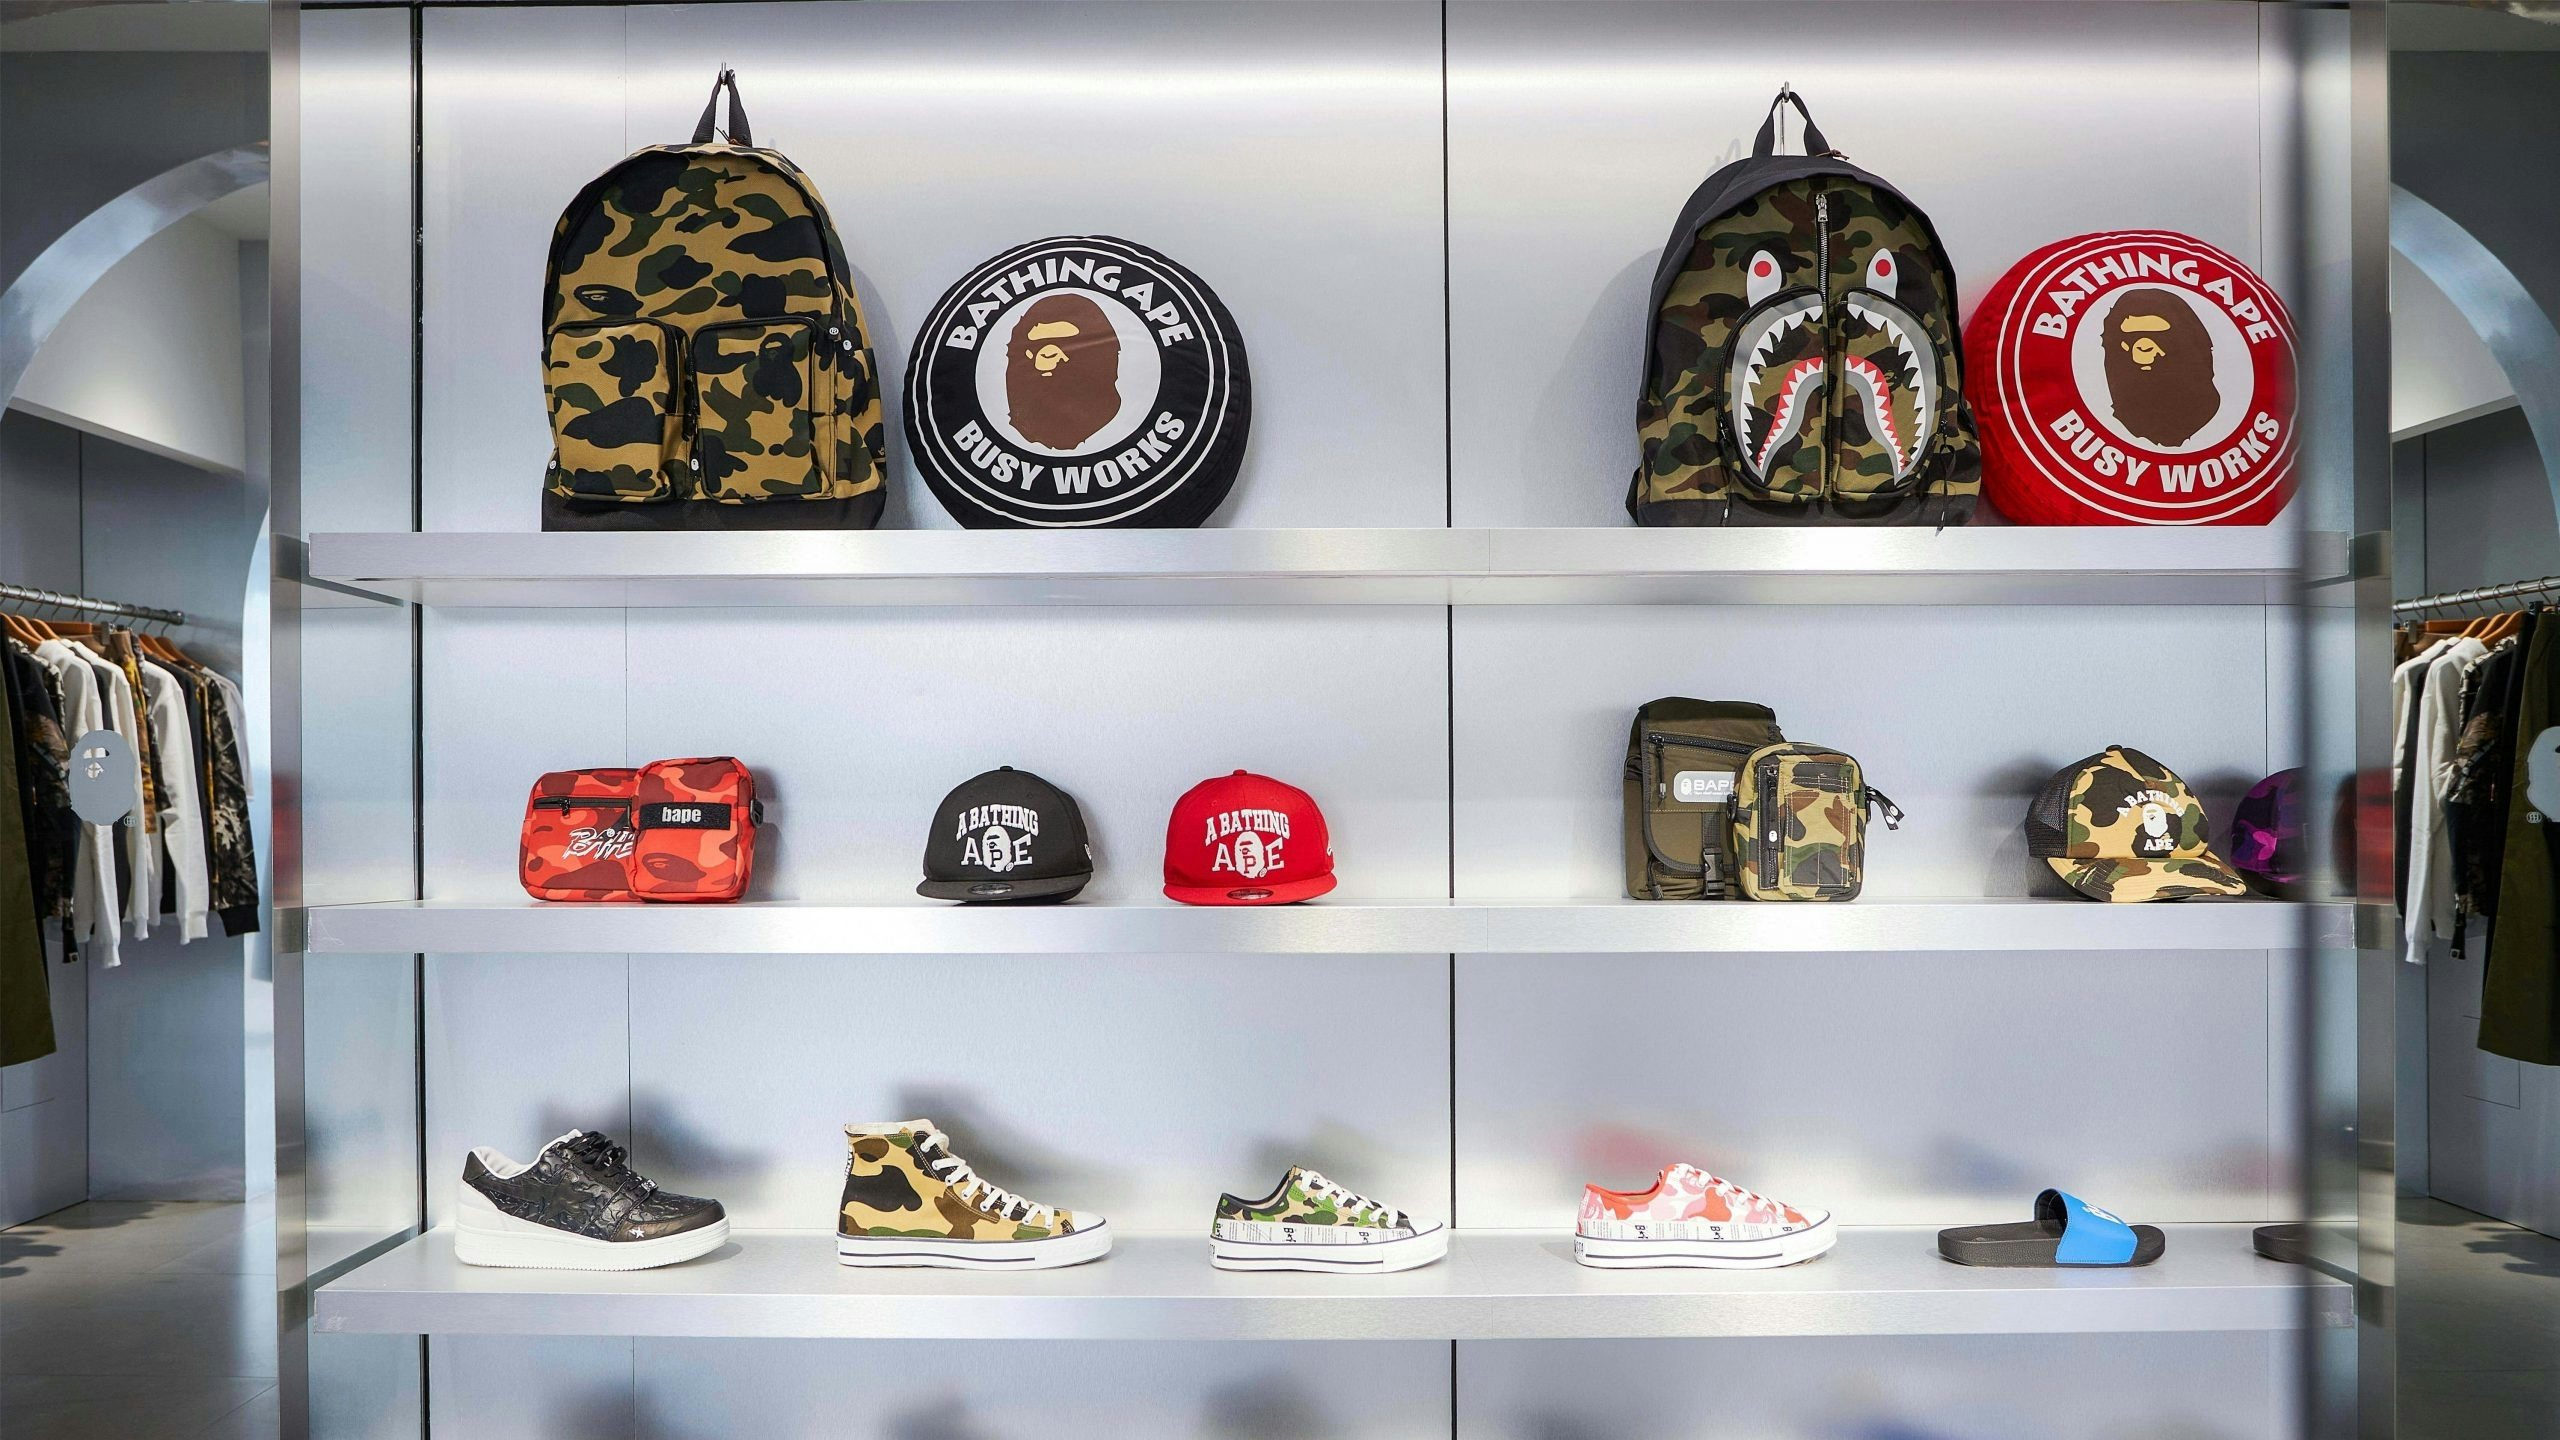 Demand for imported luxury goods remained strong in 2020, despite the pandemic. But what do Chinese buyers want the most from abroad? Photo: BAPE's Weibo